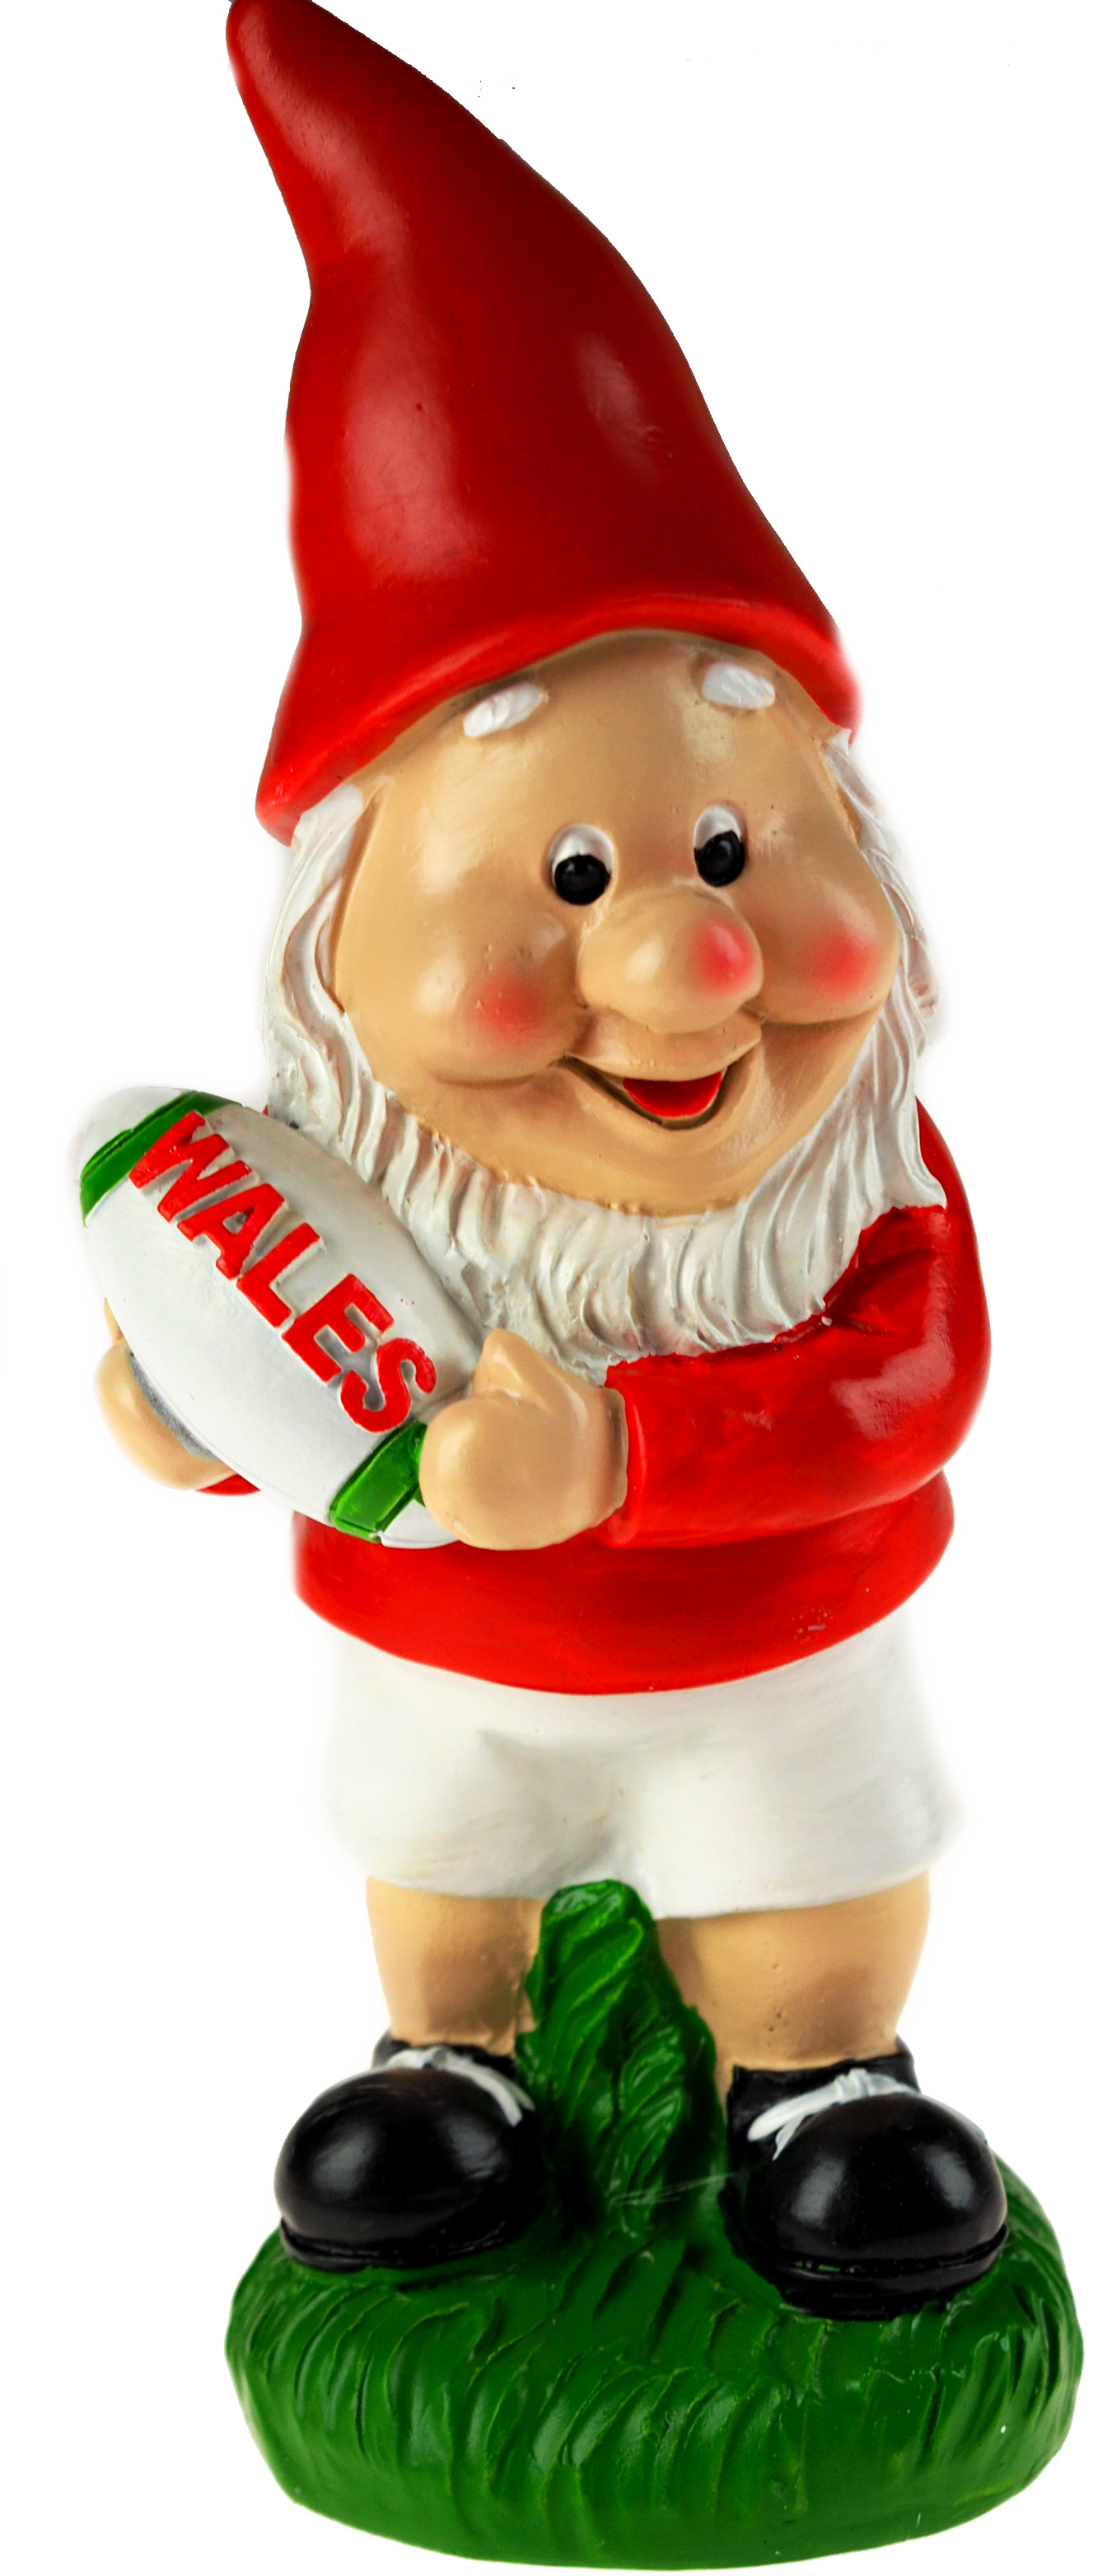 Welsh 20cm Novelty Garden Gnome Ornaments Figurine - Wales Rugby Design